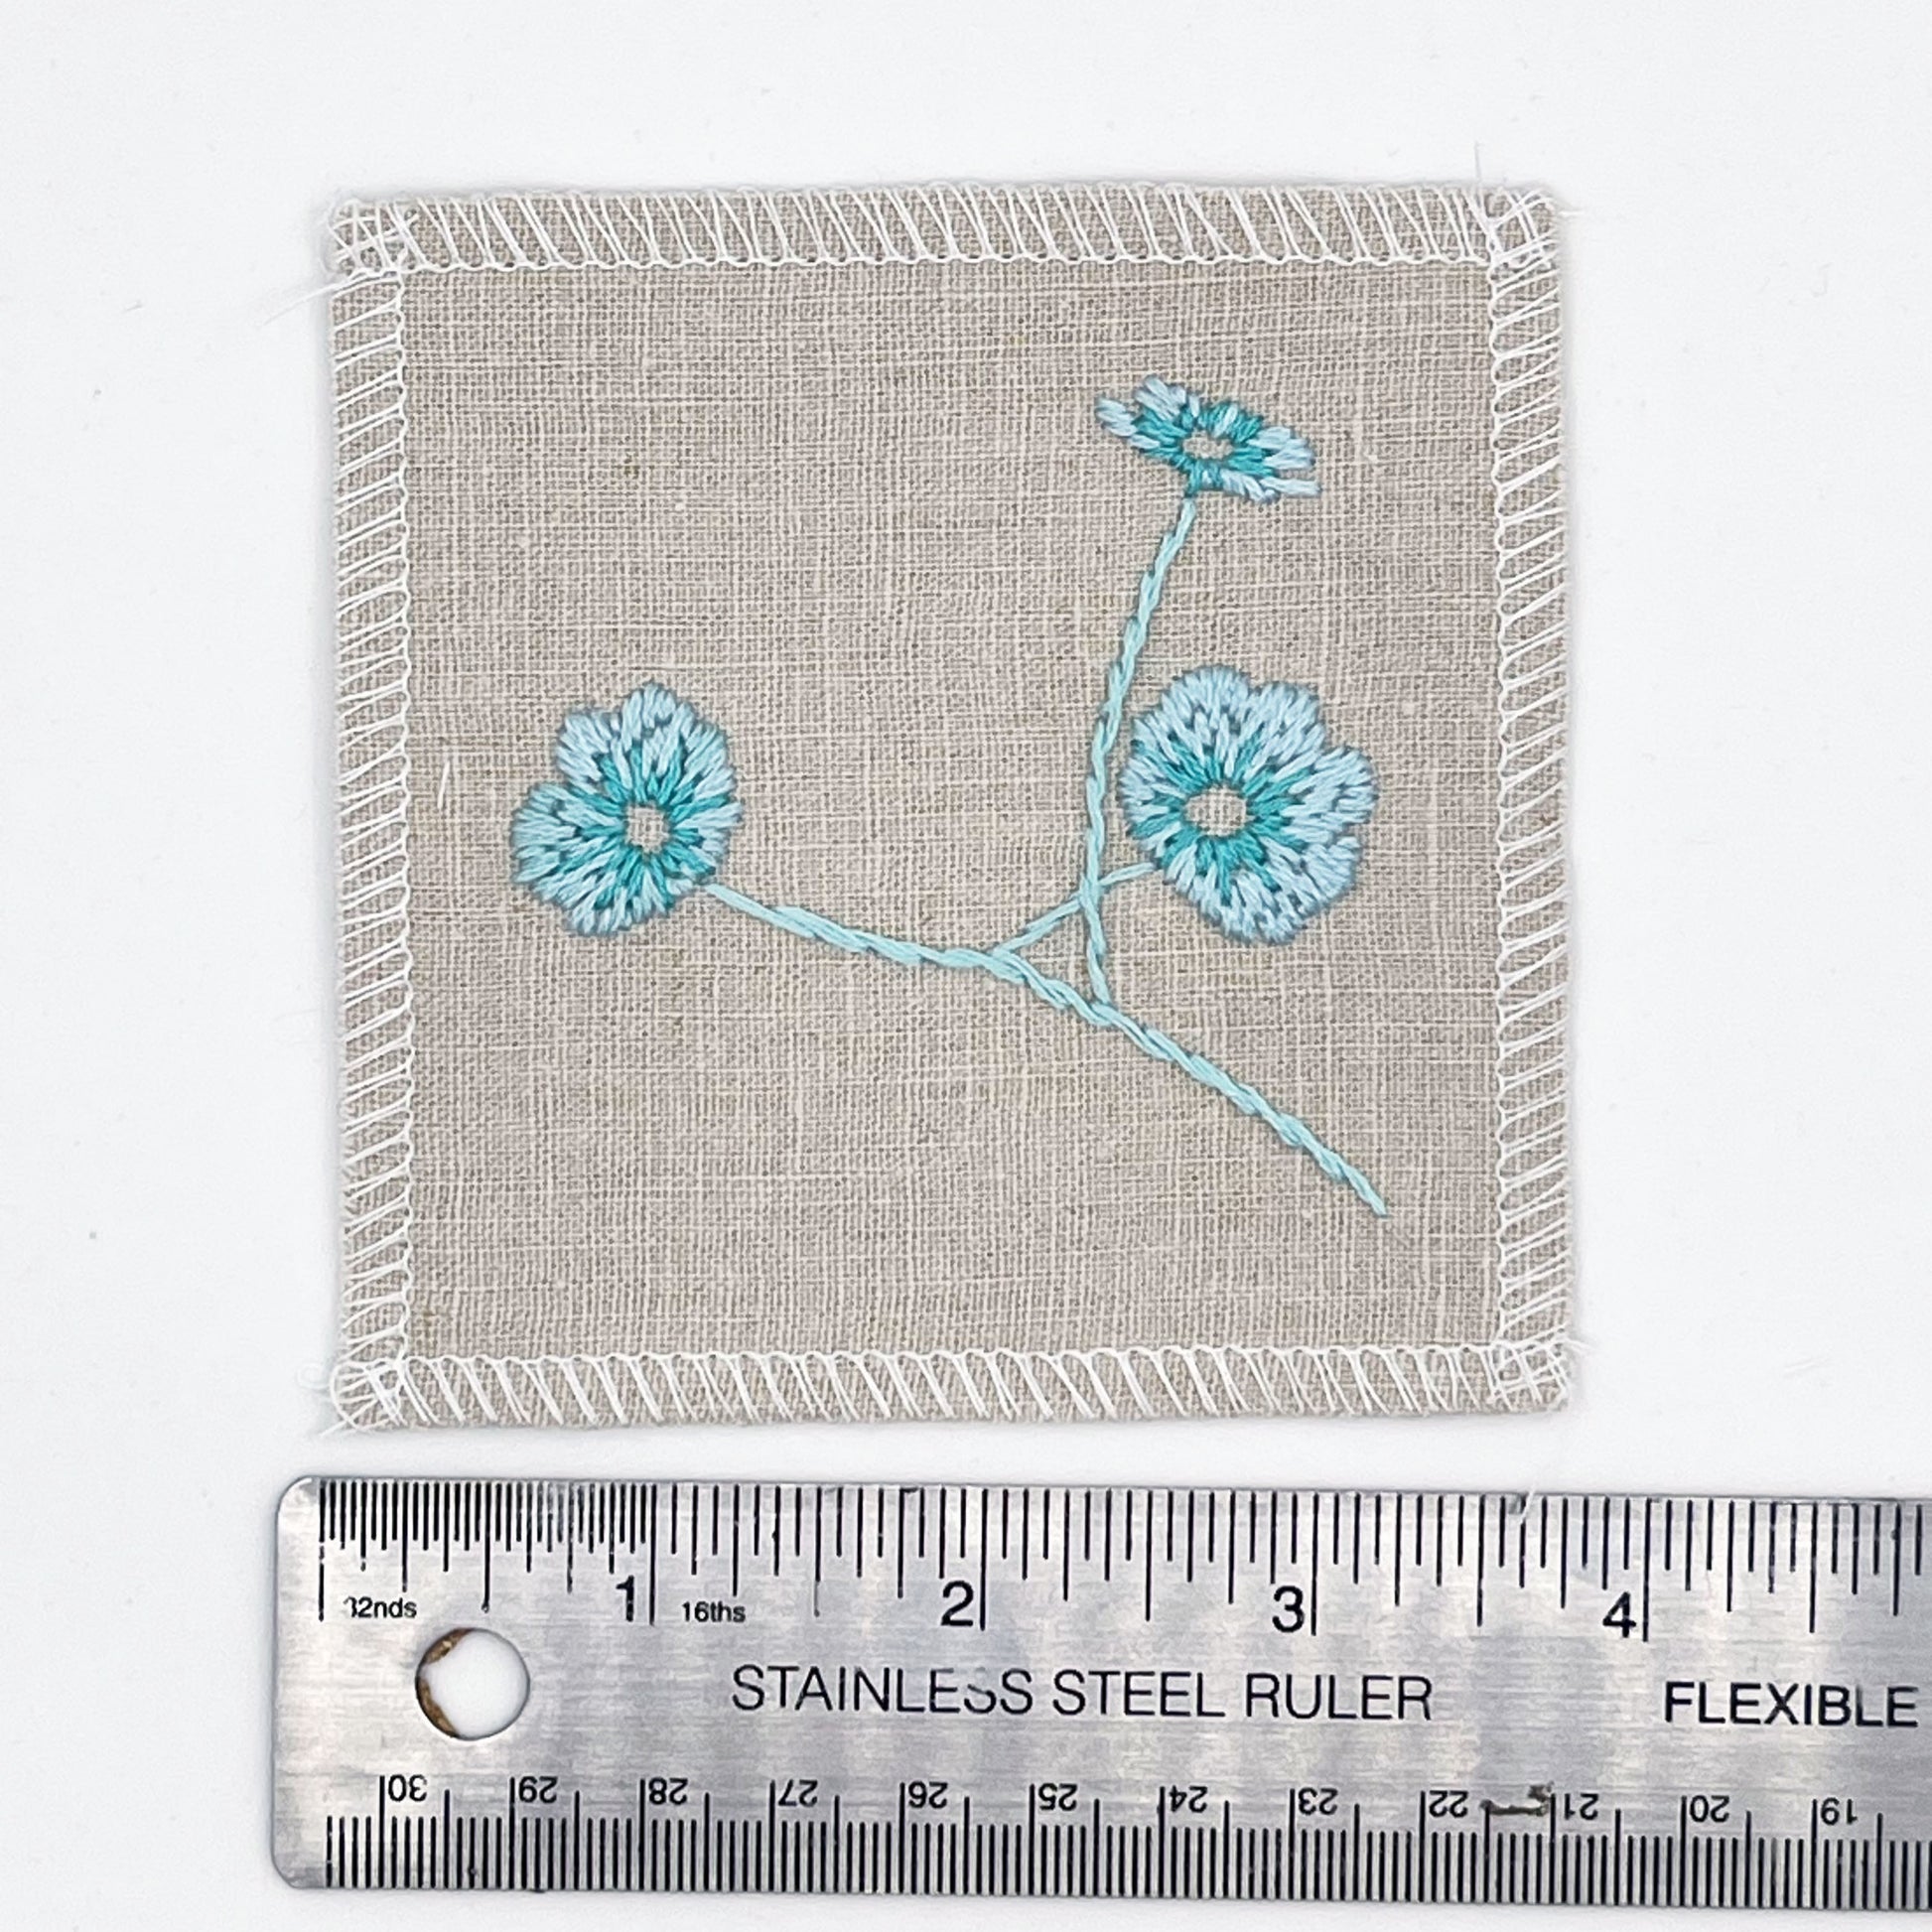 a natural colored square patch, hand embroidered with three poppies on a stem, in shades of robin's egg blue, placed next to a metal ruler to show a width of four inches, on a white background